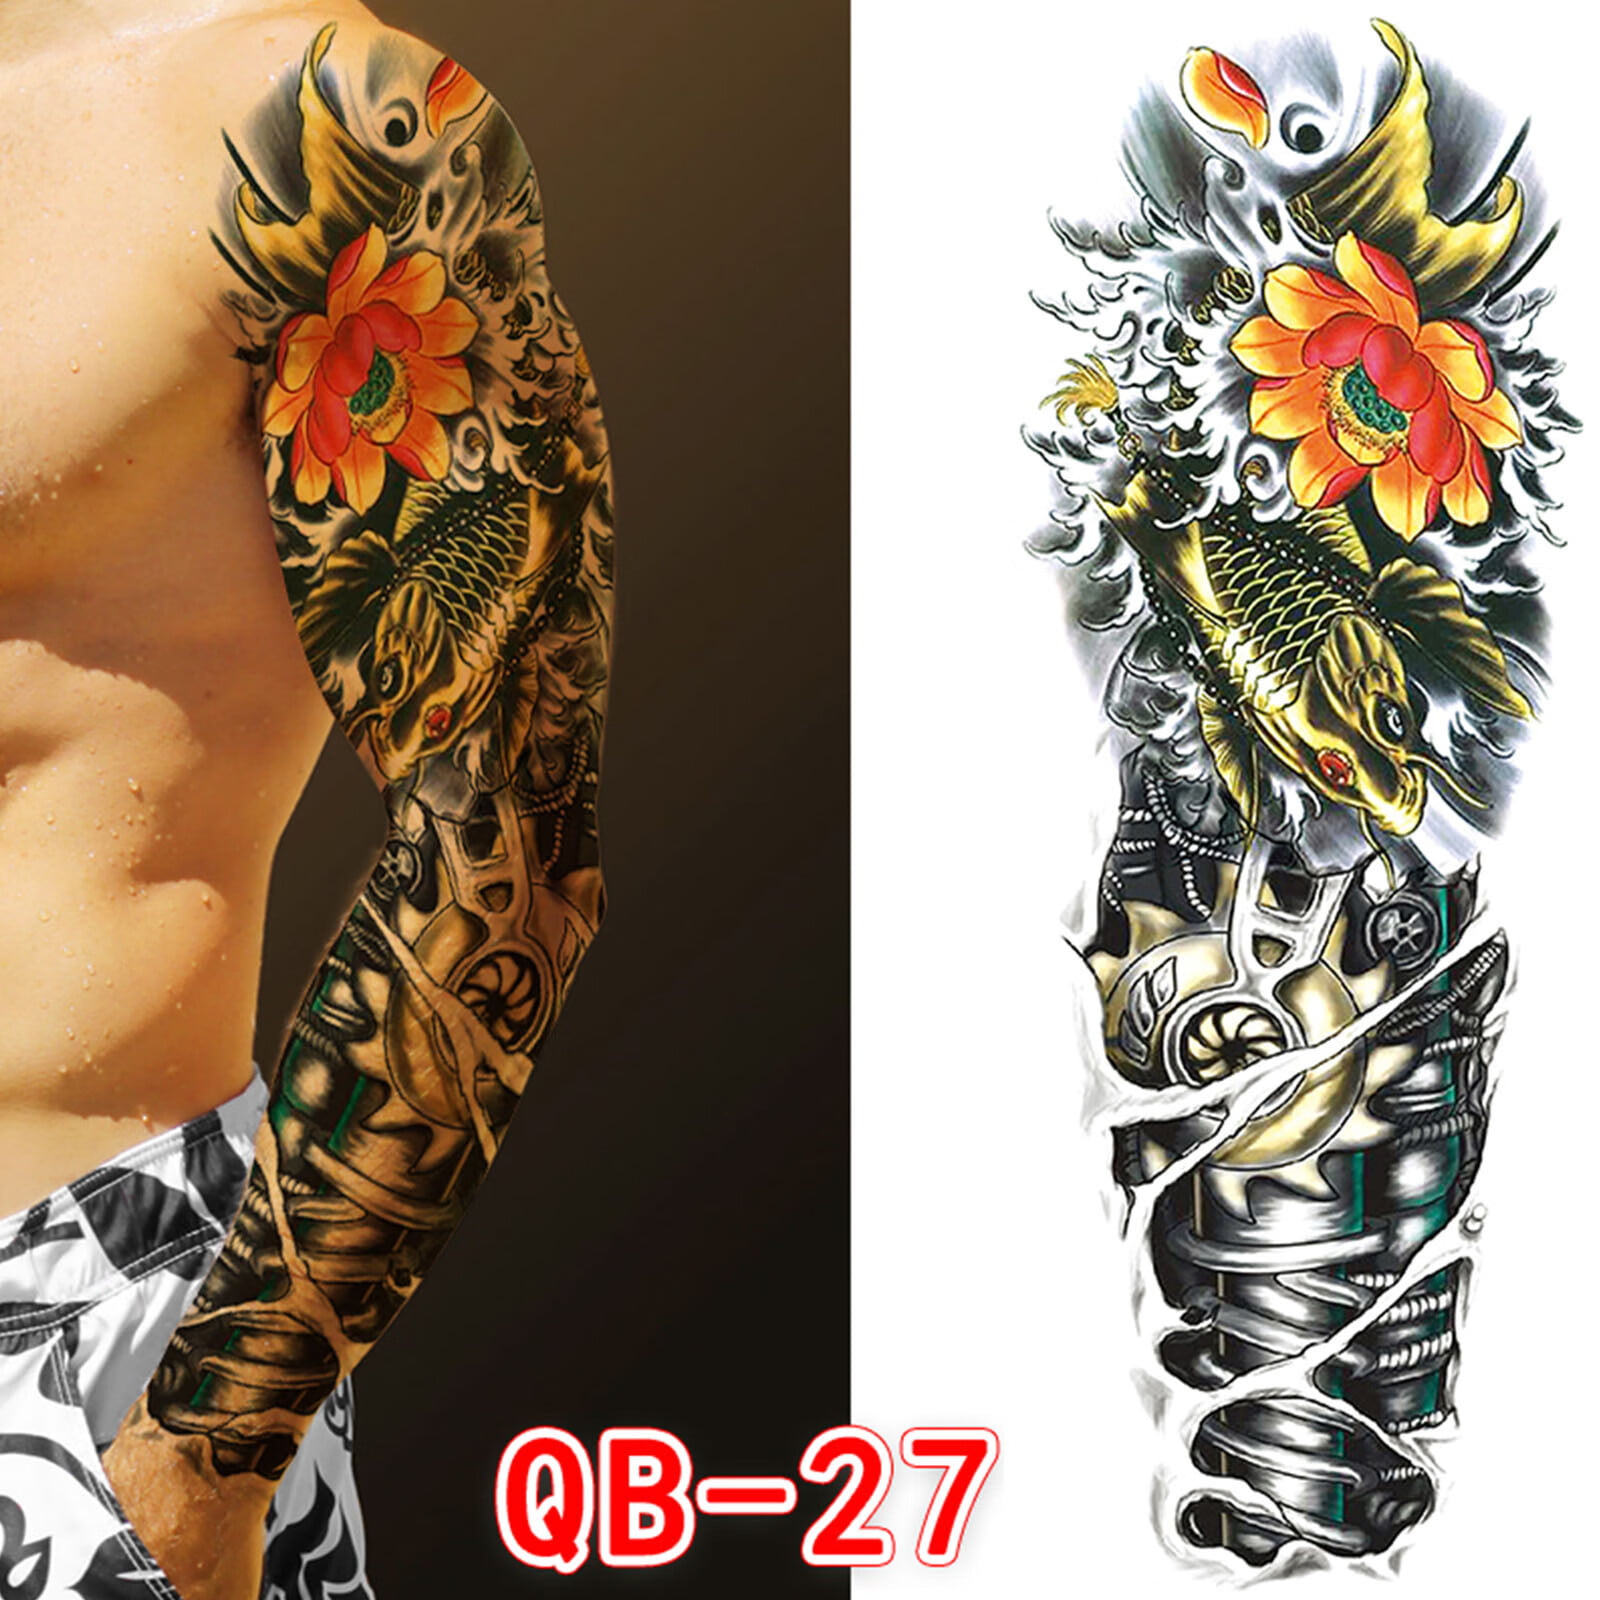 3D (The Canvas Arts) Temporary Tattoo Waterproof For Men Women Arm Hand  (Angry Tiger Tattoo) HB-851 Size 21X15 cm : Amazon.in: Beauty